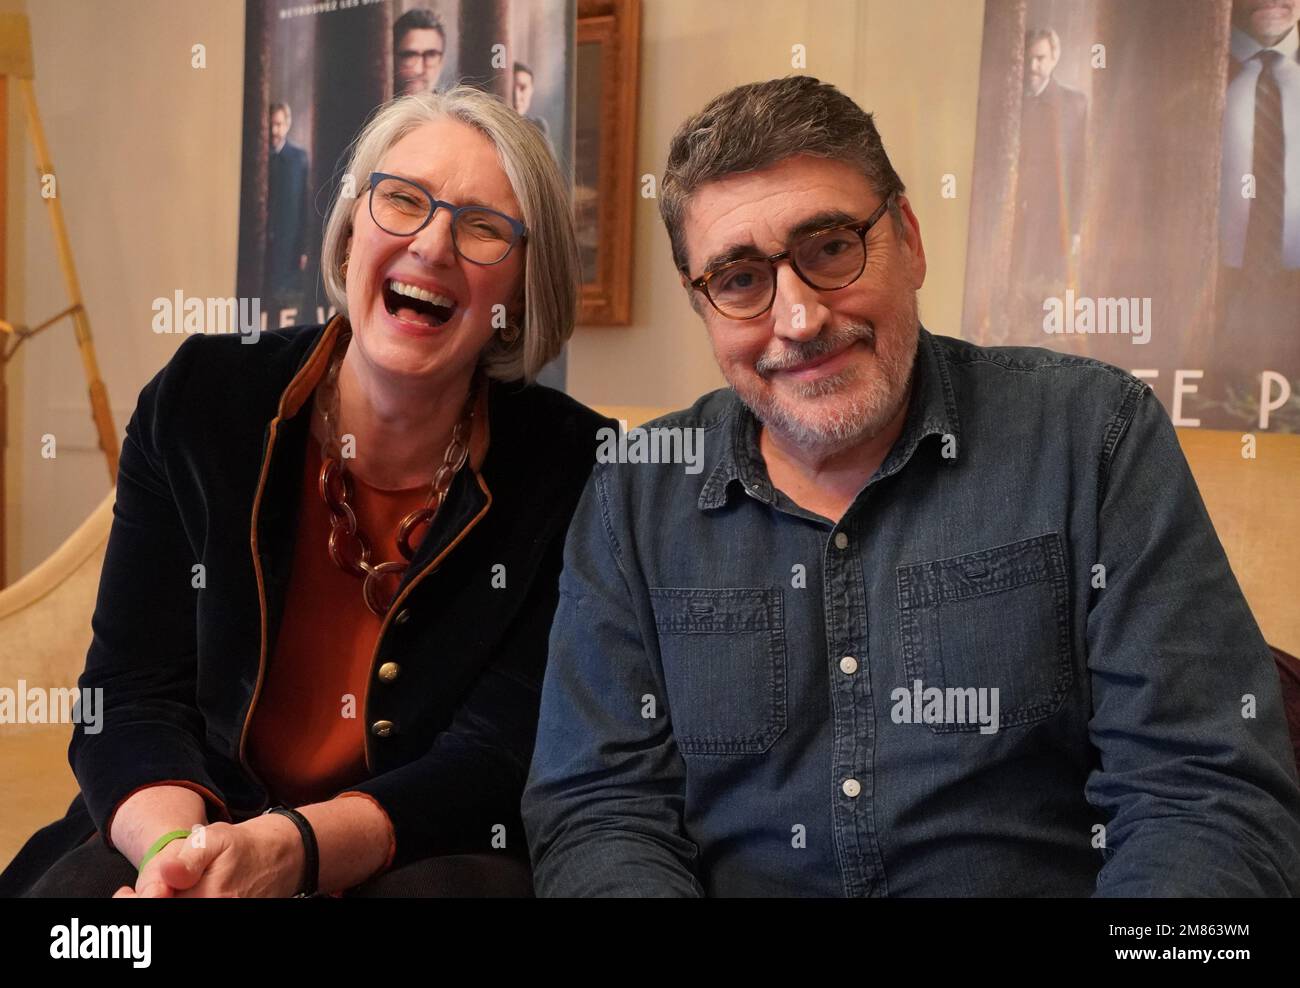 Author Louise Penny and actor Alfred Molina promoting their new TV series Three Pines. Stock Photo